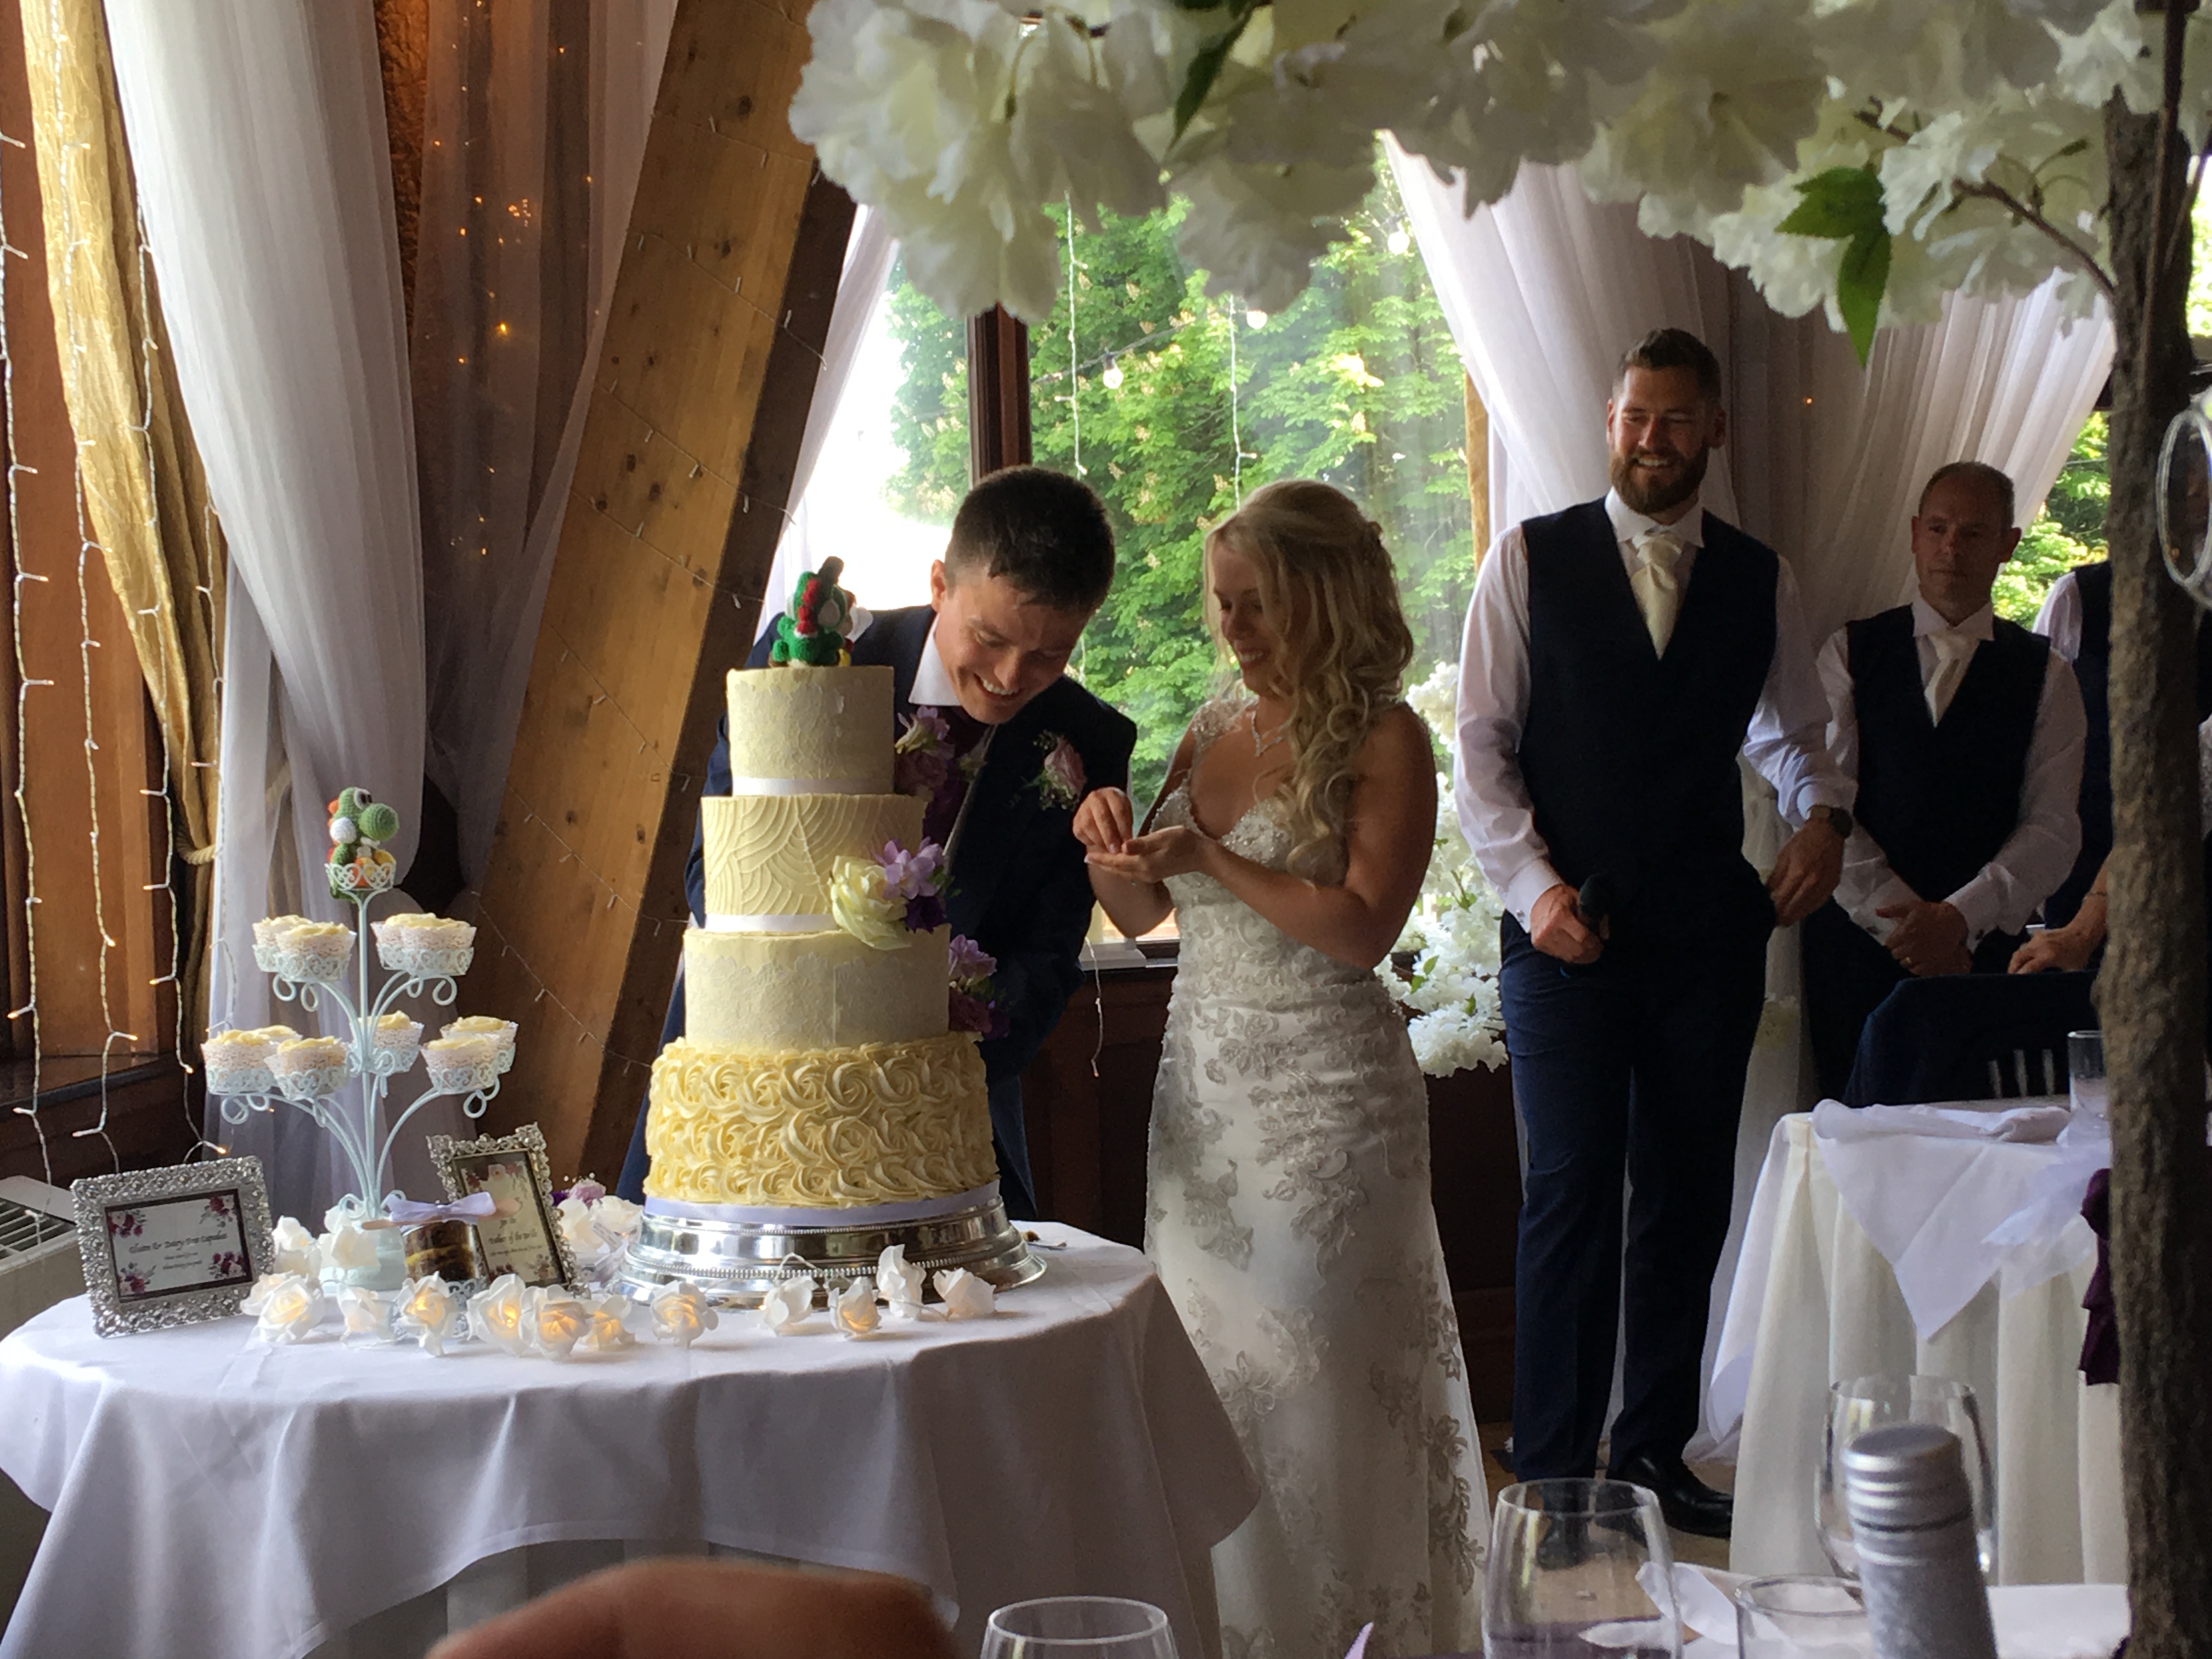 Neville and Bex cutting their wedding cake